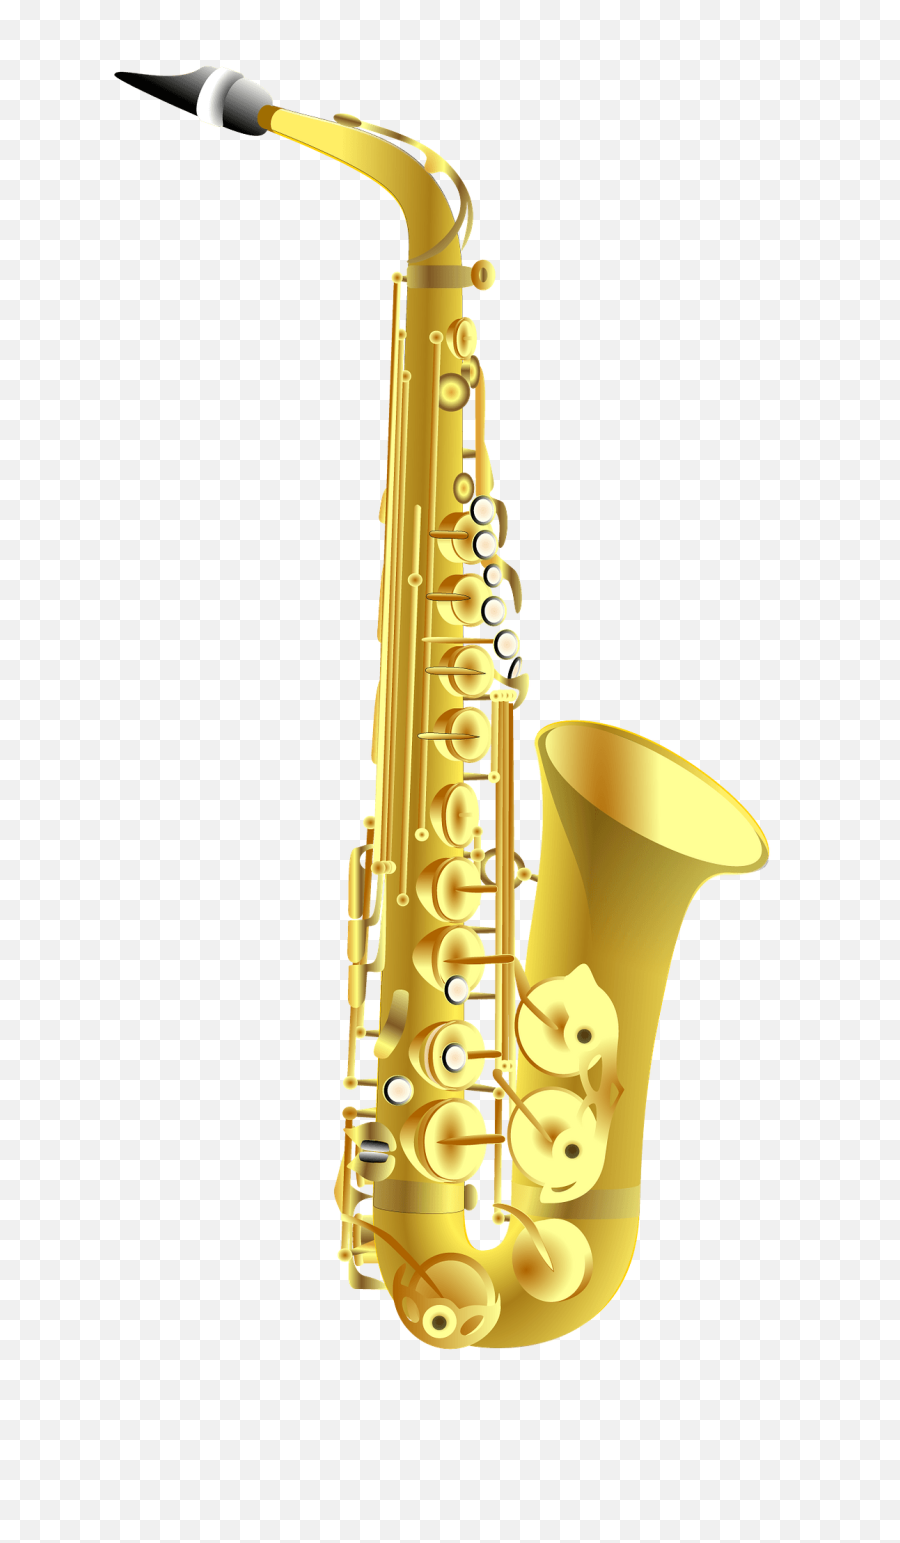 Download Free Png Background - Instrument That Makes Loud Sound,Saxophone Transparent Background